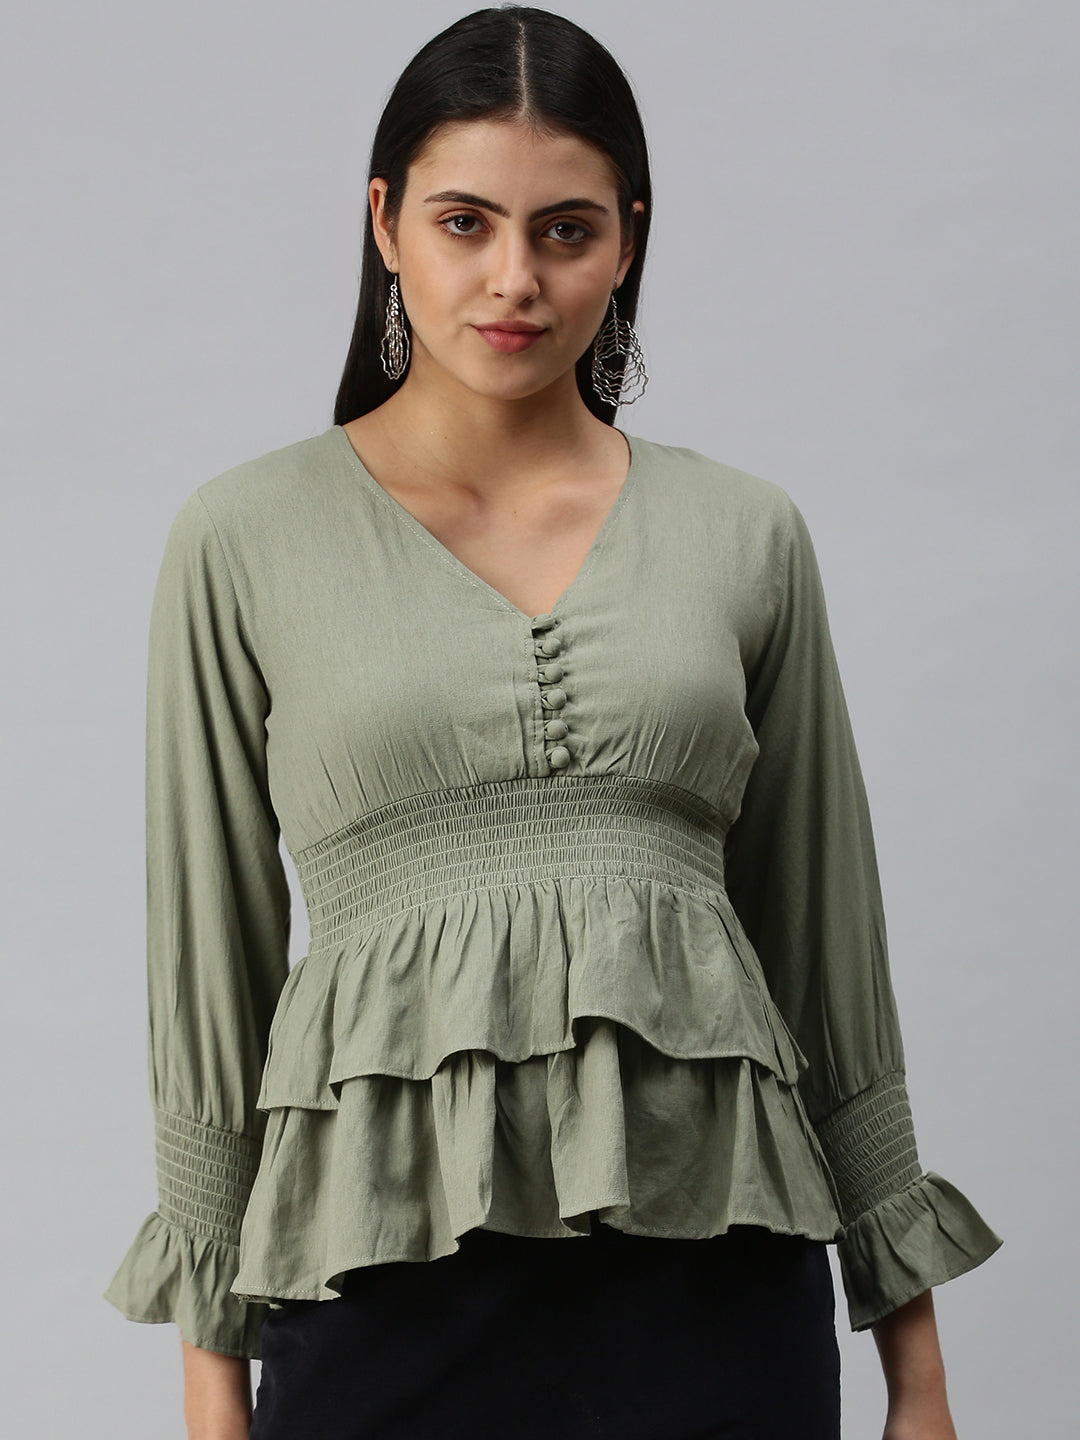 Women's Solid Olive Top